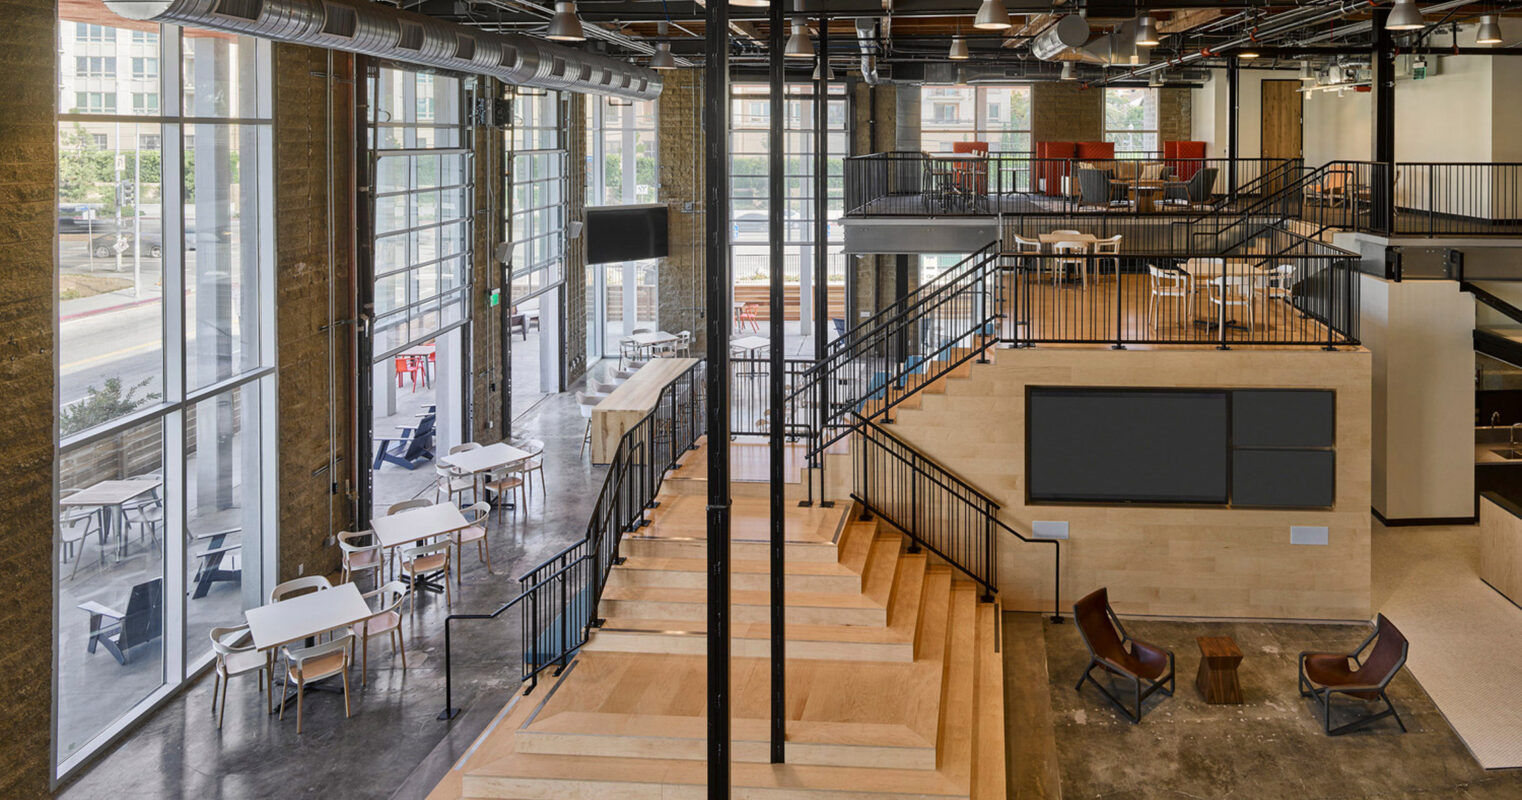 Open-plan office space featuring exposed ceiling beams and ductwork, complemented by industrial-style pendant lighting. A central wooden staircase with metal railings leads to a mezzanine level with additional seating areas. Large windows allow ample natural light, highlighting the modern, minimalist furniture arrangement.